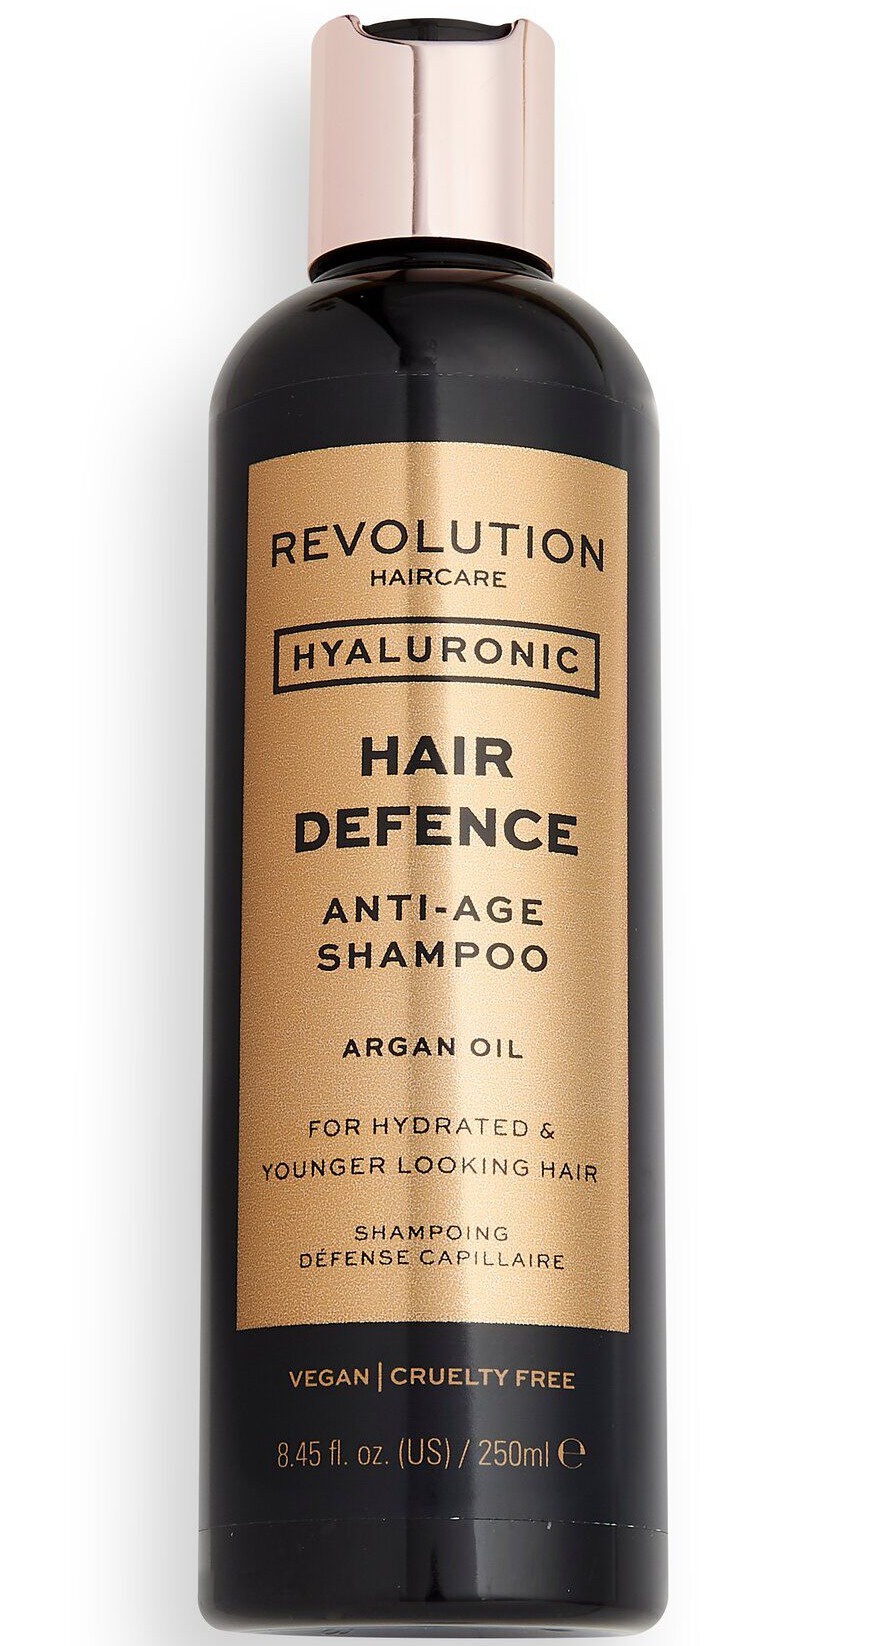 Revolution Haircare Hyaluronic Hair Defence Anti-Age Shampoo